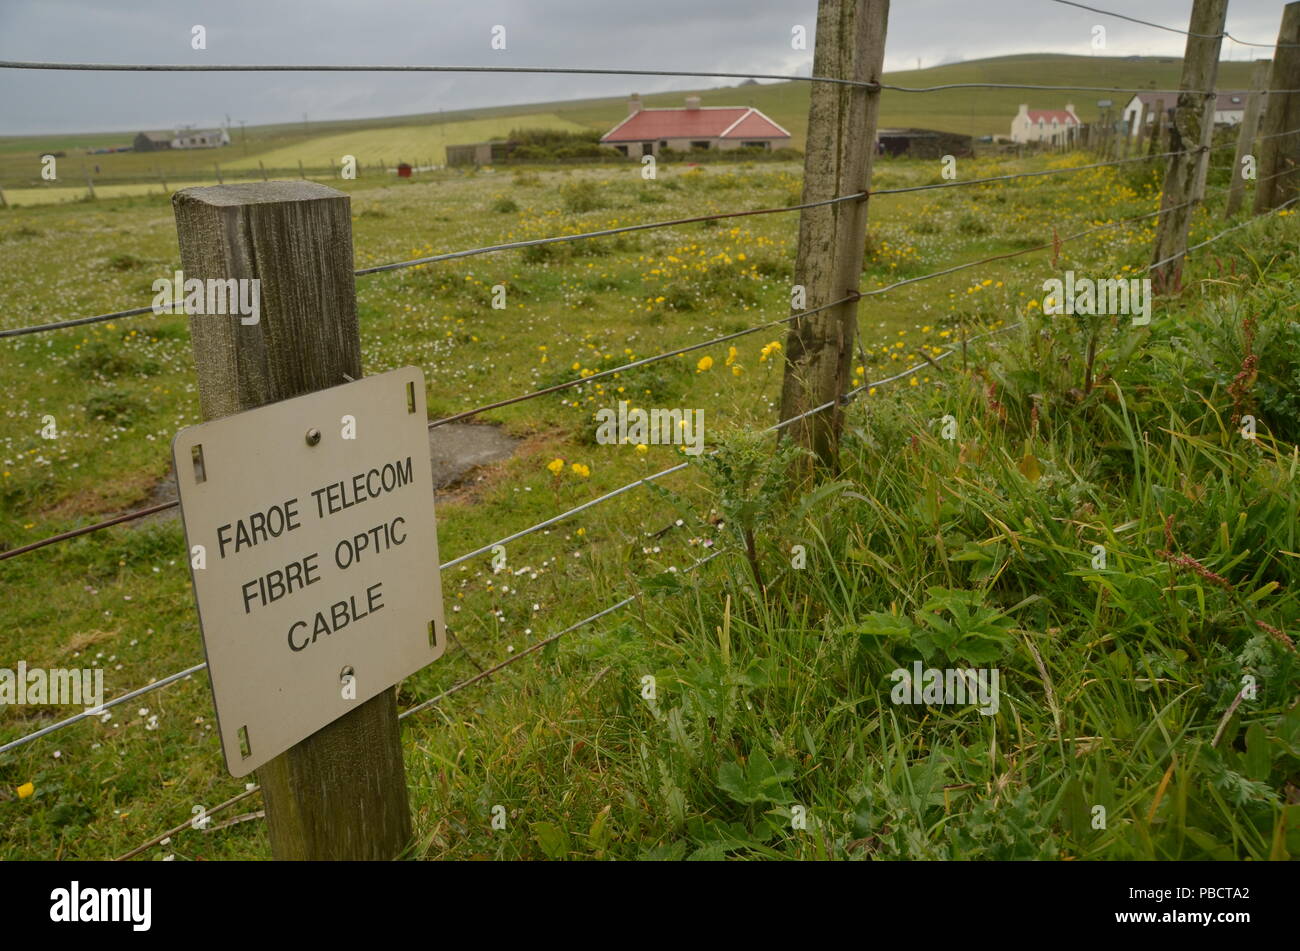 A marker sign for a fibre optic telecommunications cable in the Shetland Isles, UK Stock Photo